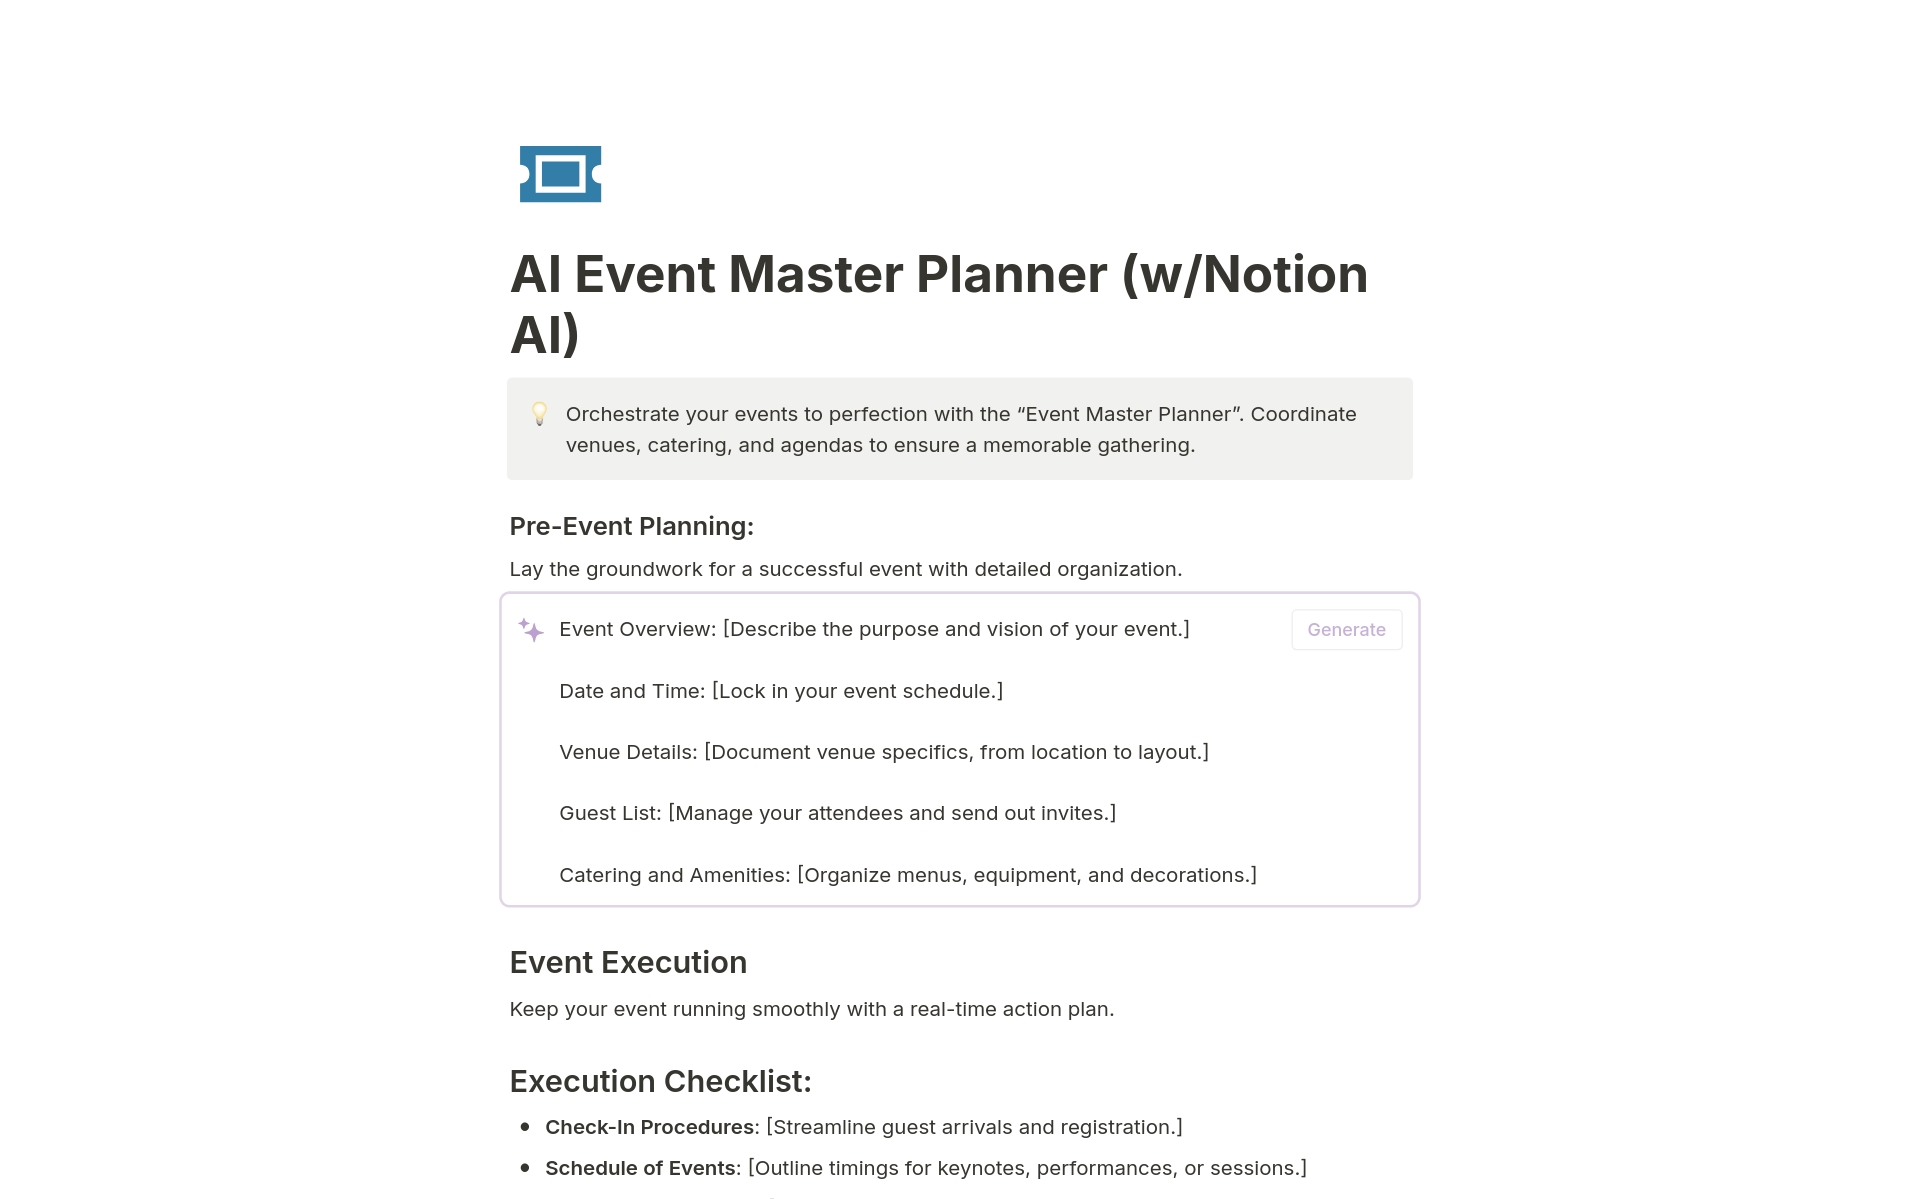 AI Event Master Planner: Transform your event ideas into memorable experiences. This intuitive Notion template guides you through planning, executing, and wrapping up events with finesse. •